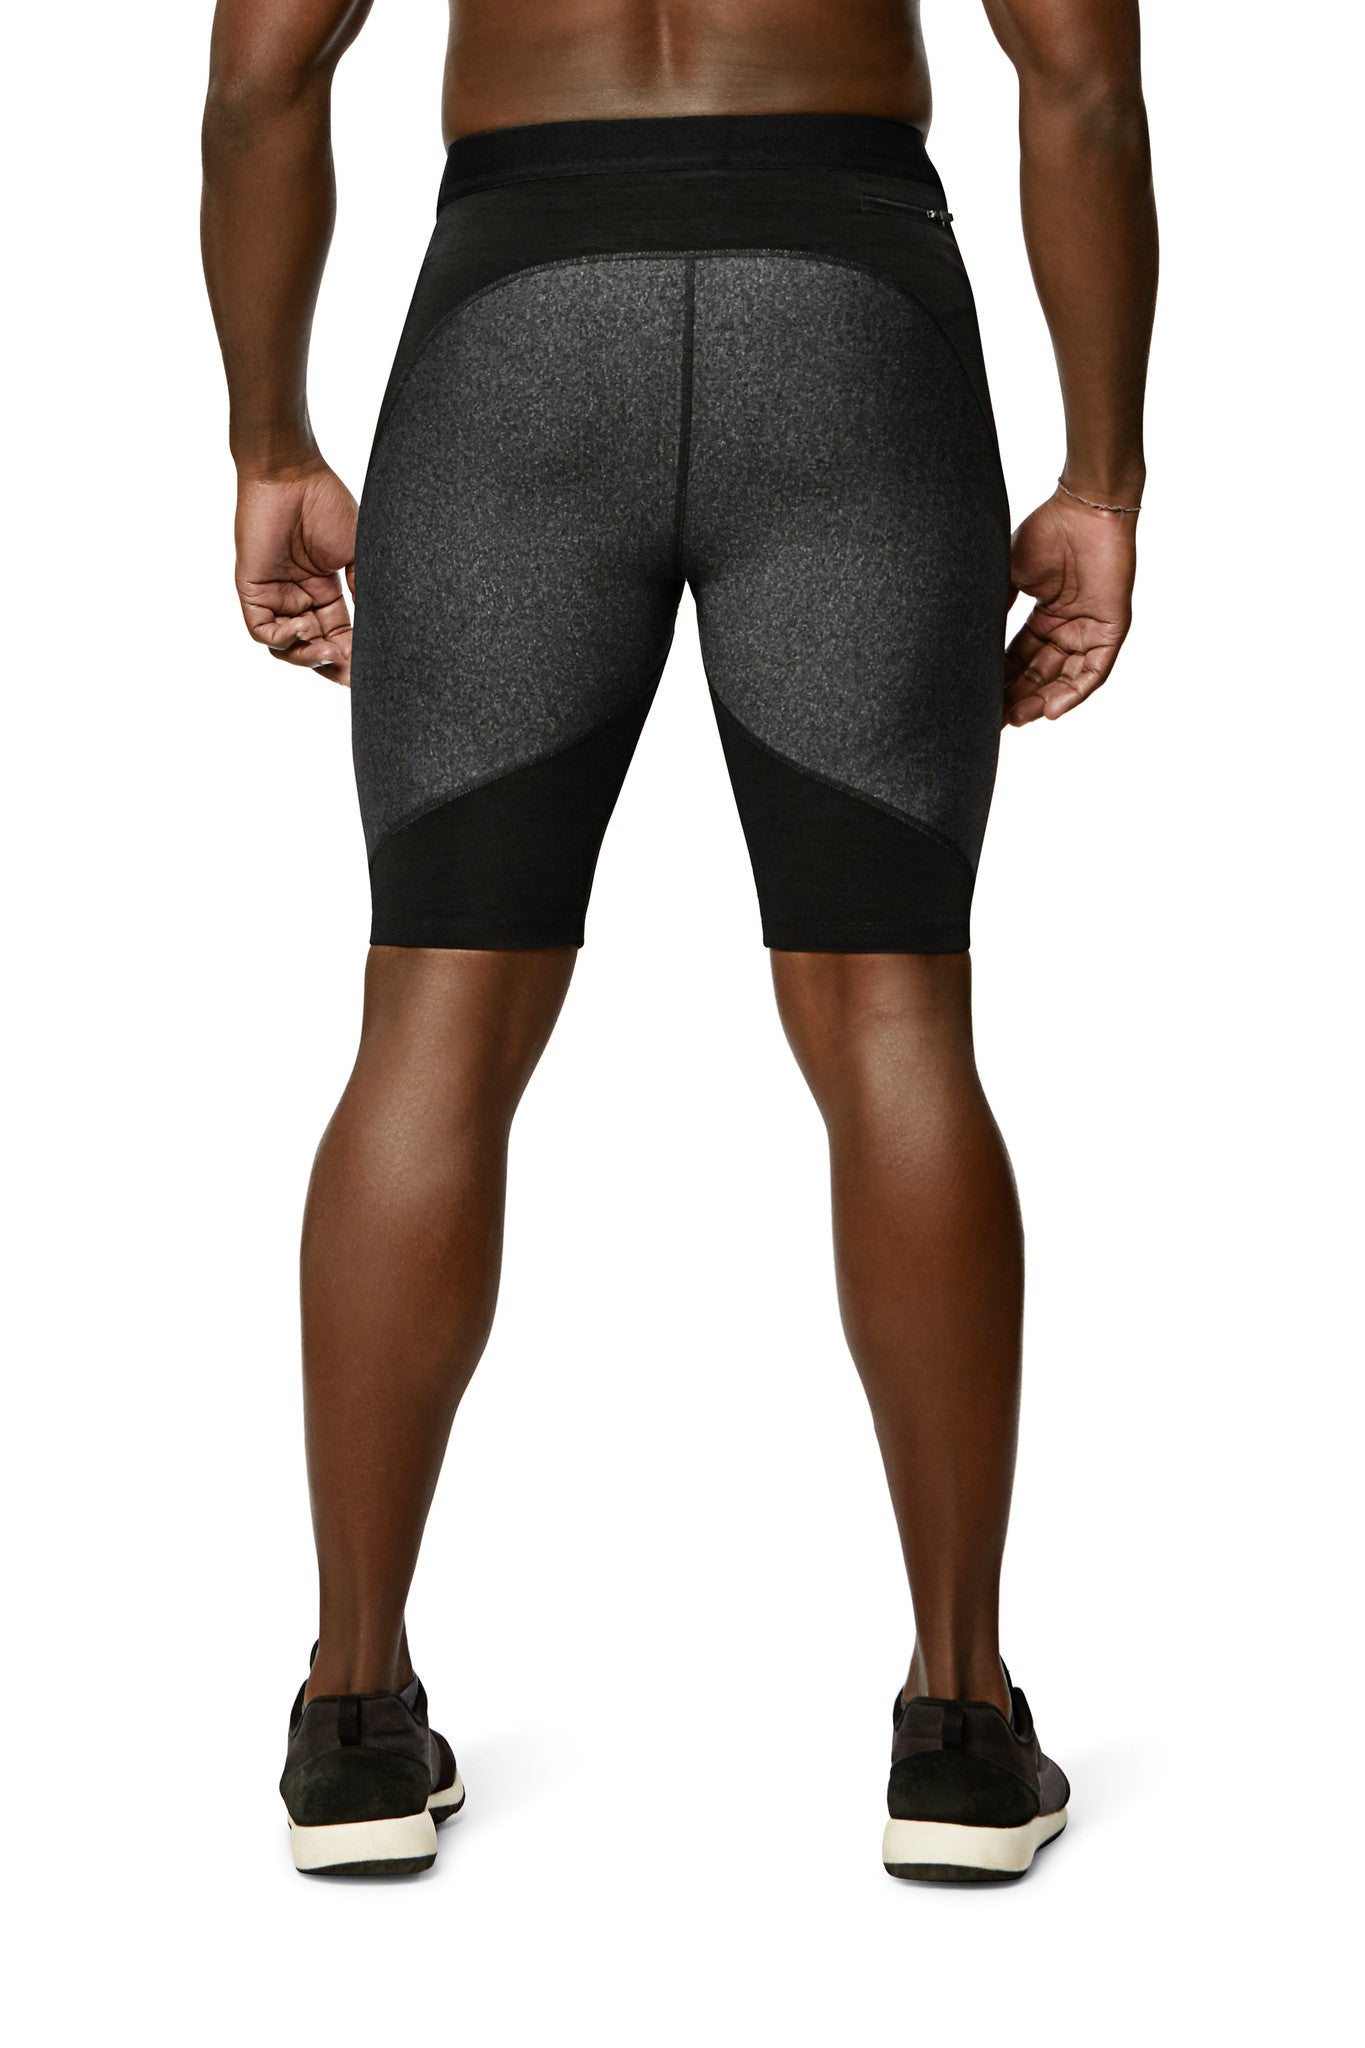 Pro Resistance Tights for Men - Athletic Grey – Physiclo